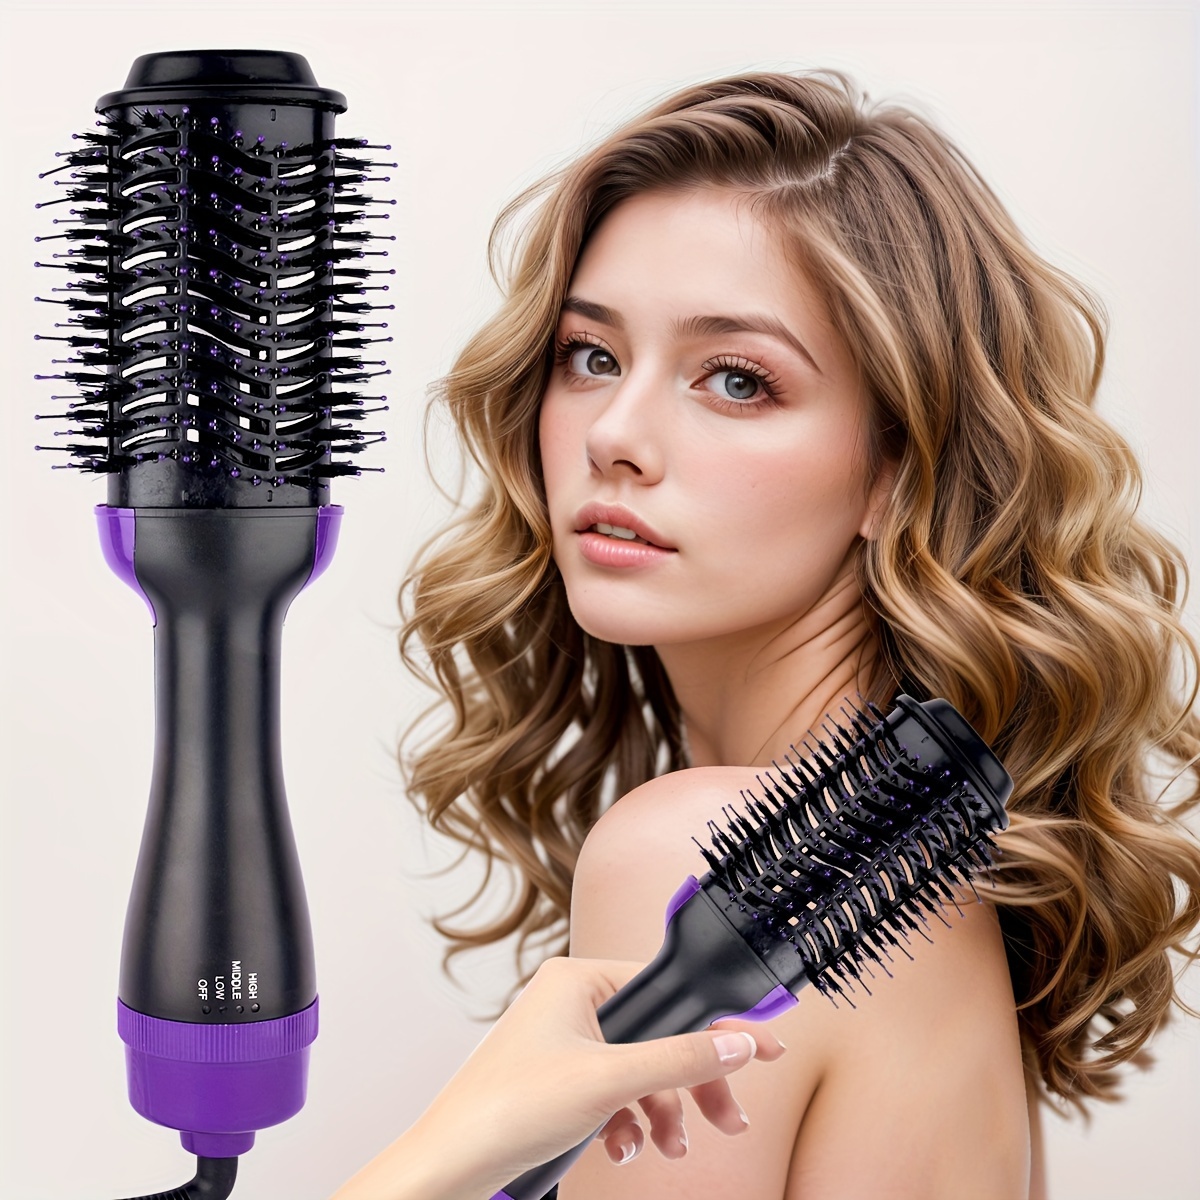 

2-in-1 Hair Dryer & Styler, Ionic Hot Air Brush For Blowouts, Curling & Straightening, Dual Voltage Hair Dryer Volumizer, Adjustable Temperature, Wet & Dry Use, Mother's Day Gift